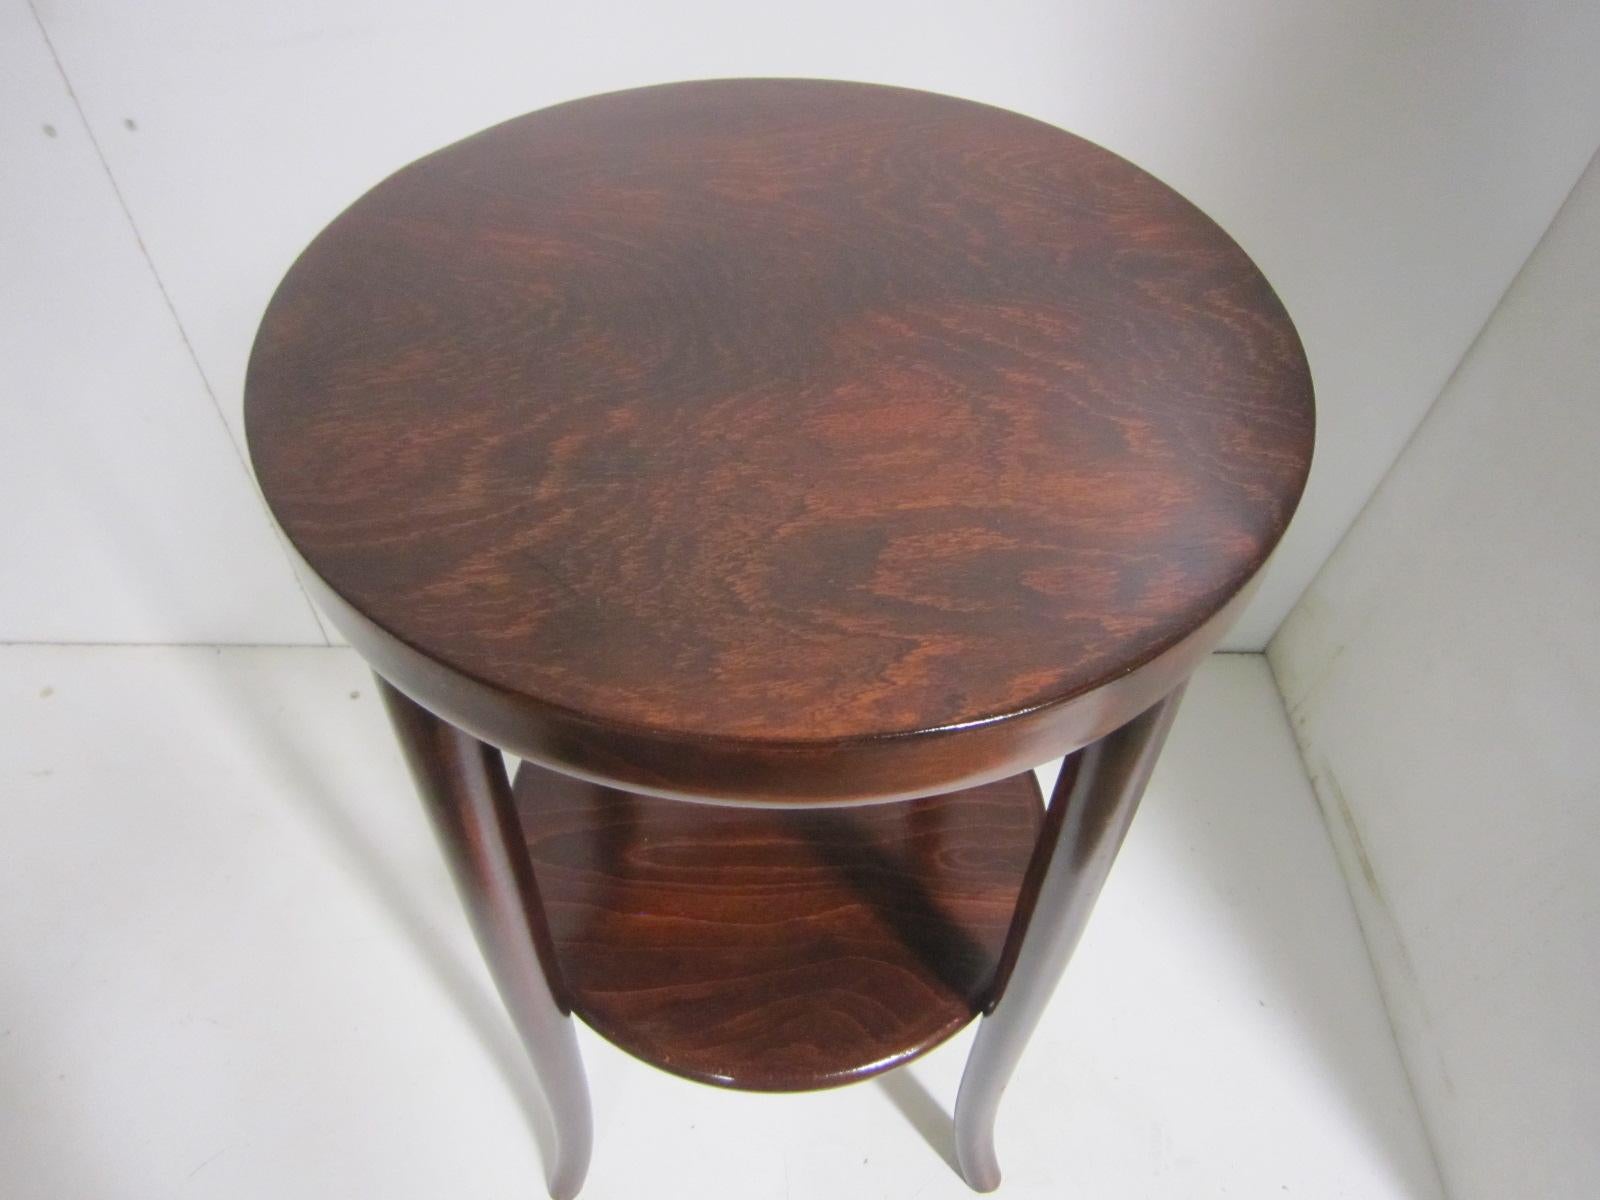 Original Austrian Small Round Bentwood Jungenstil Side Table with Oxblood Finish 6